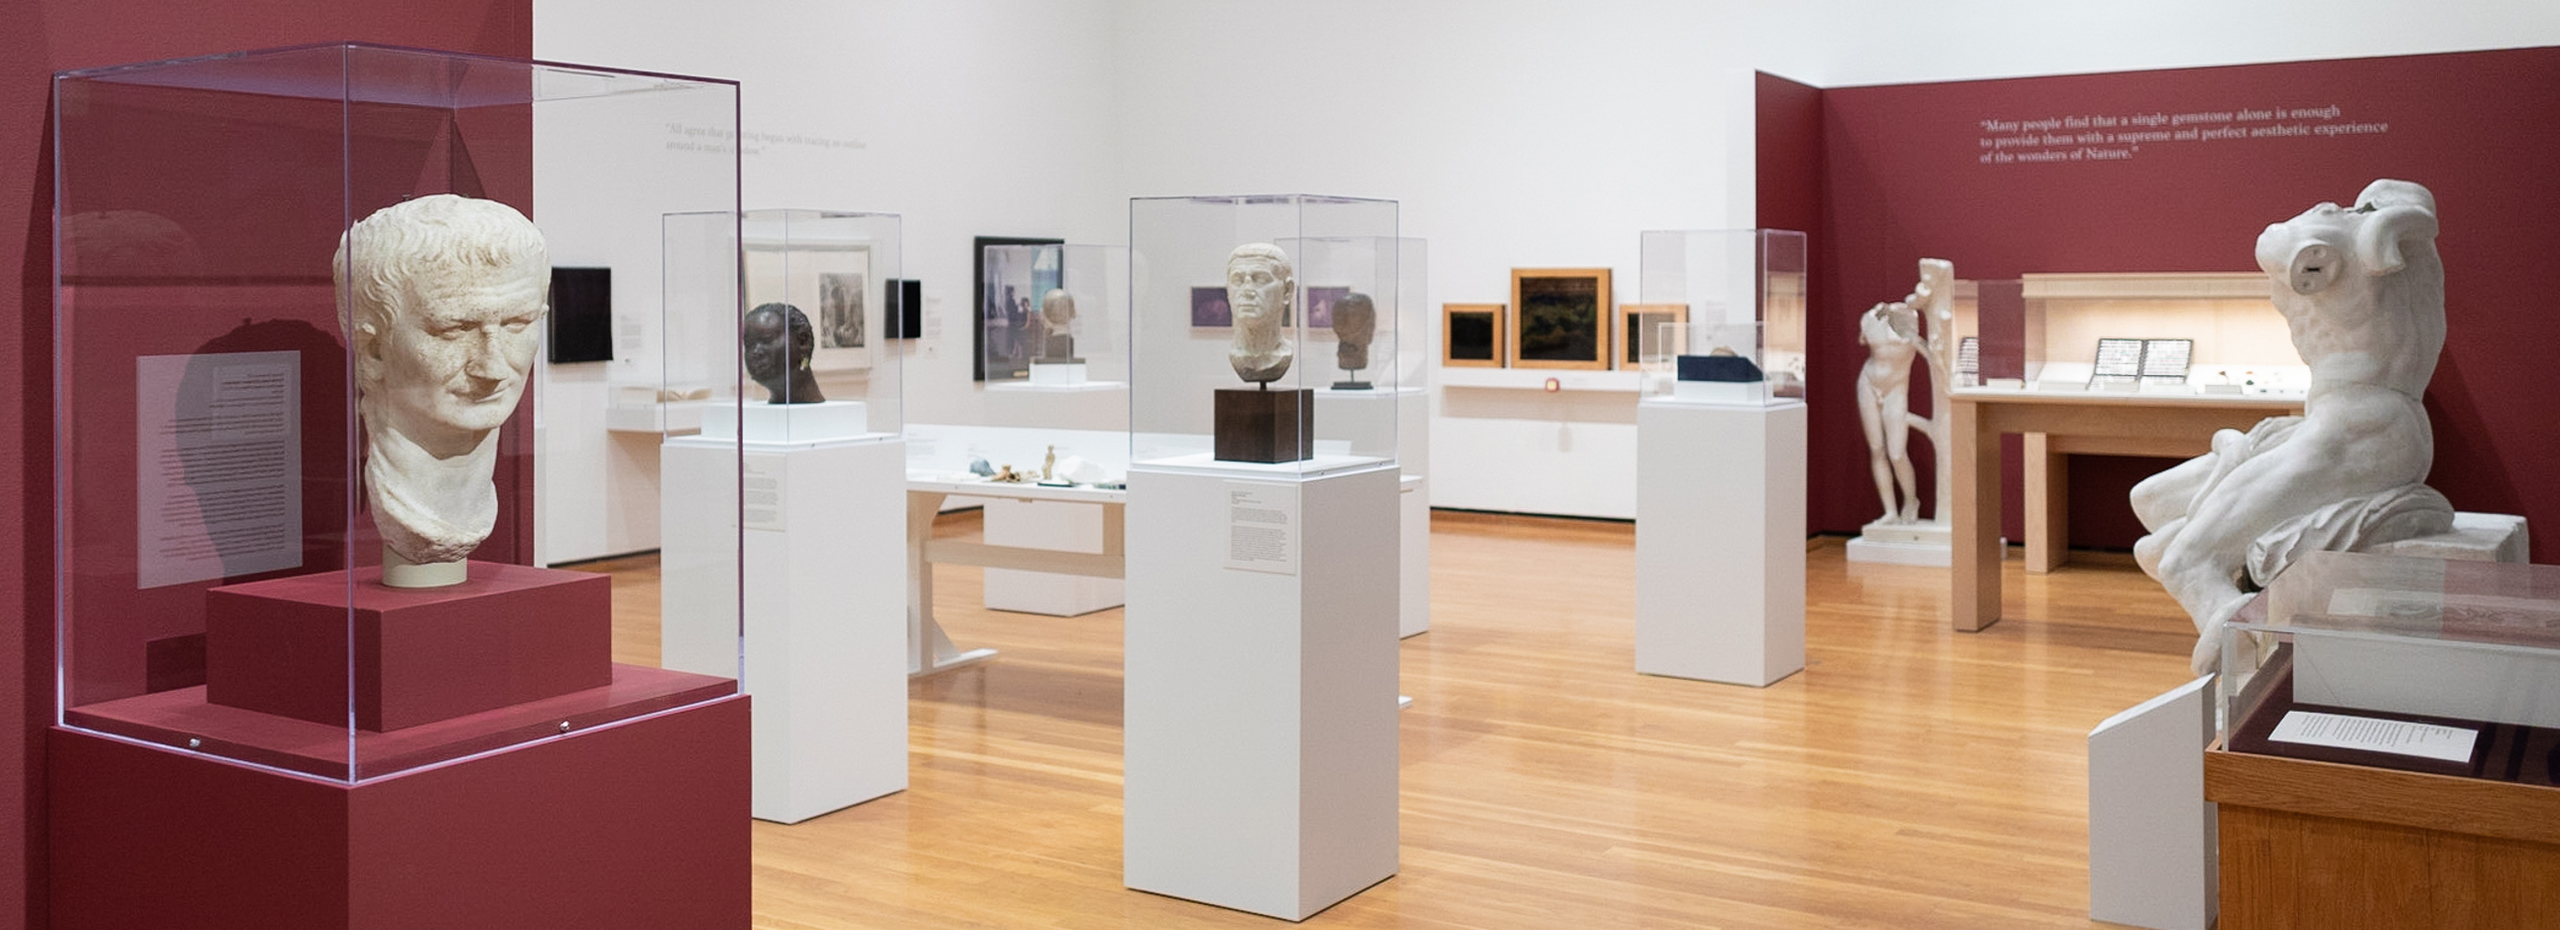 A museum gallery with sculpture and other artworks